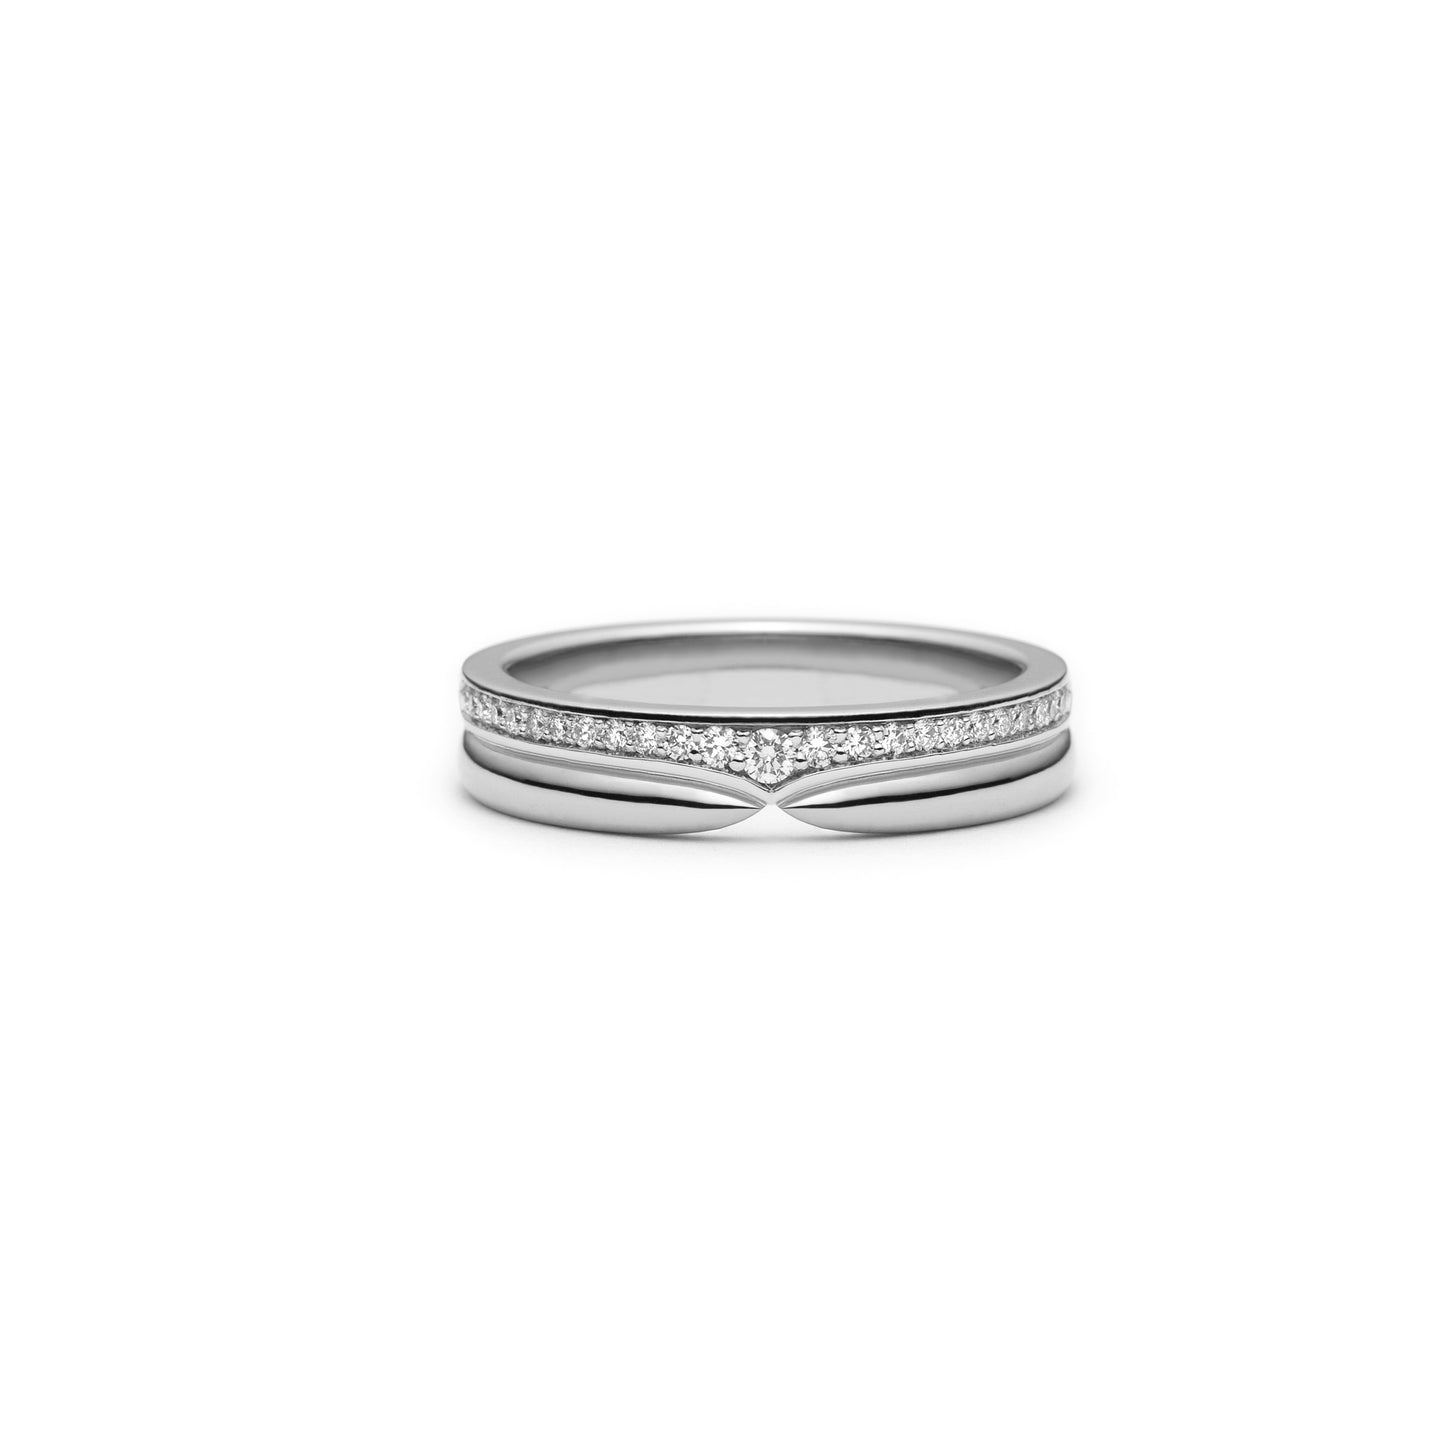 Pinched spiked diamond wedding band